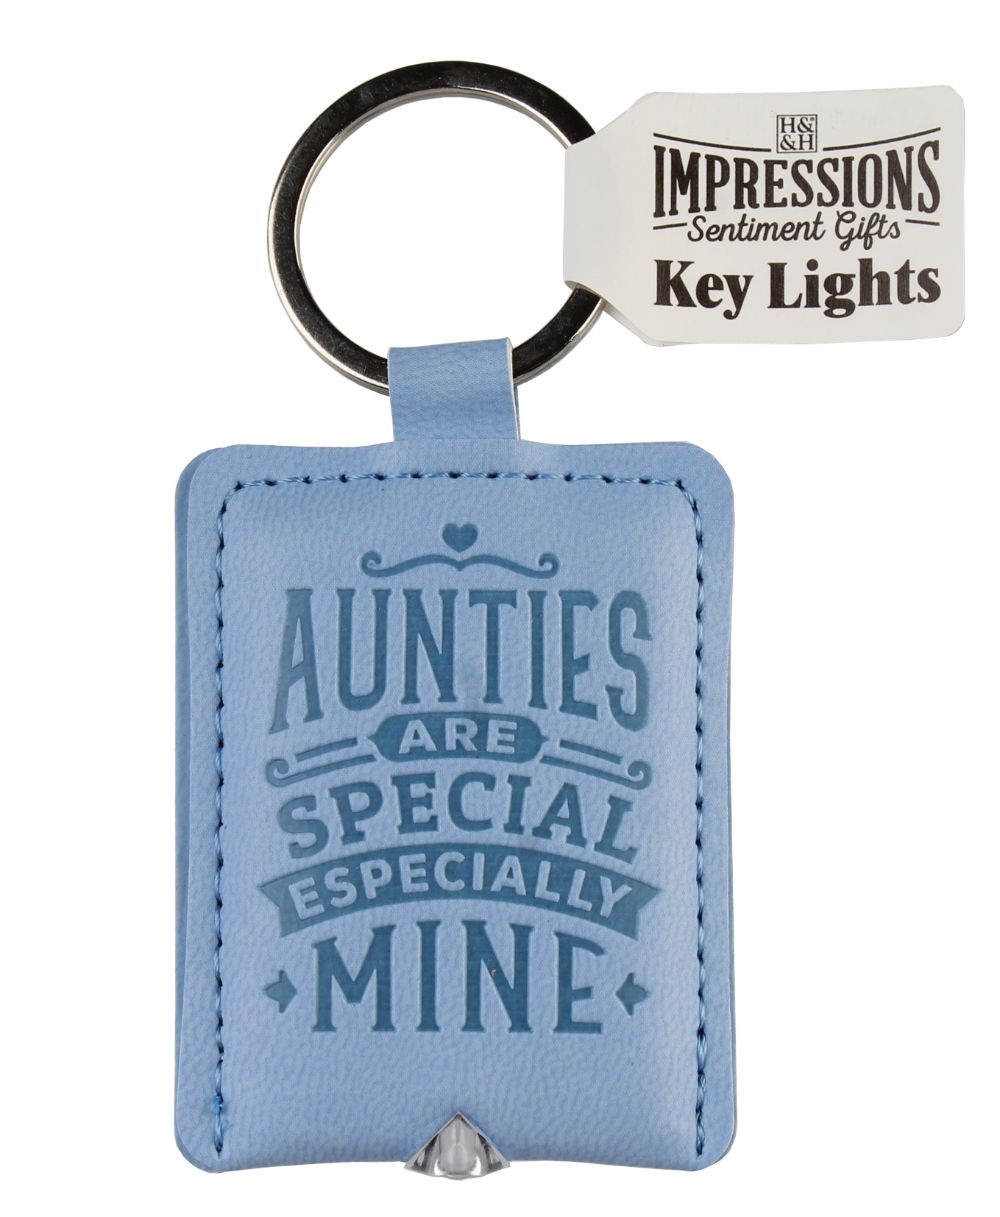 Aunties Are Special Especially Mine Key Light Keyring Torch